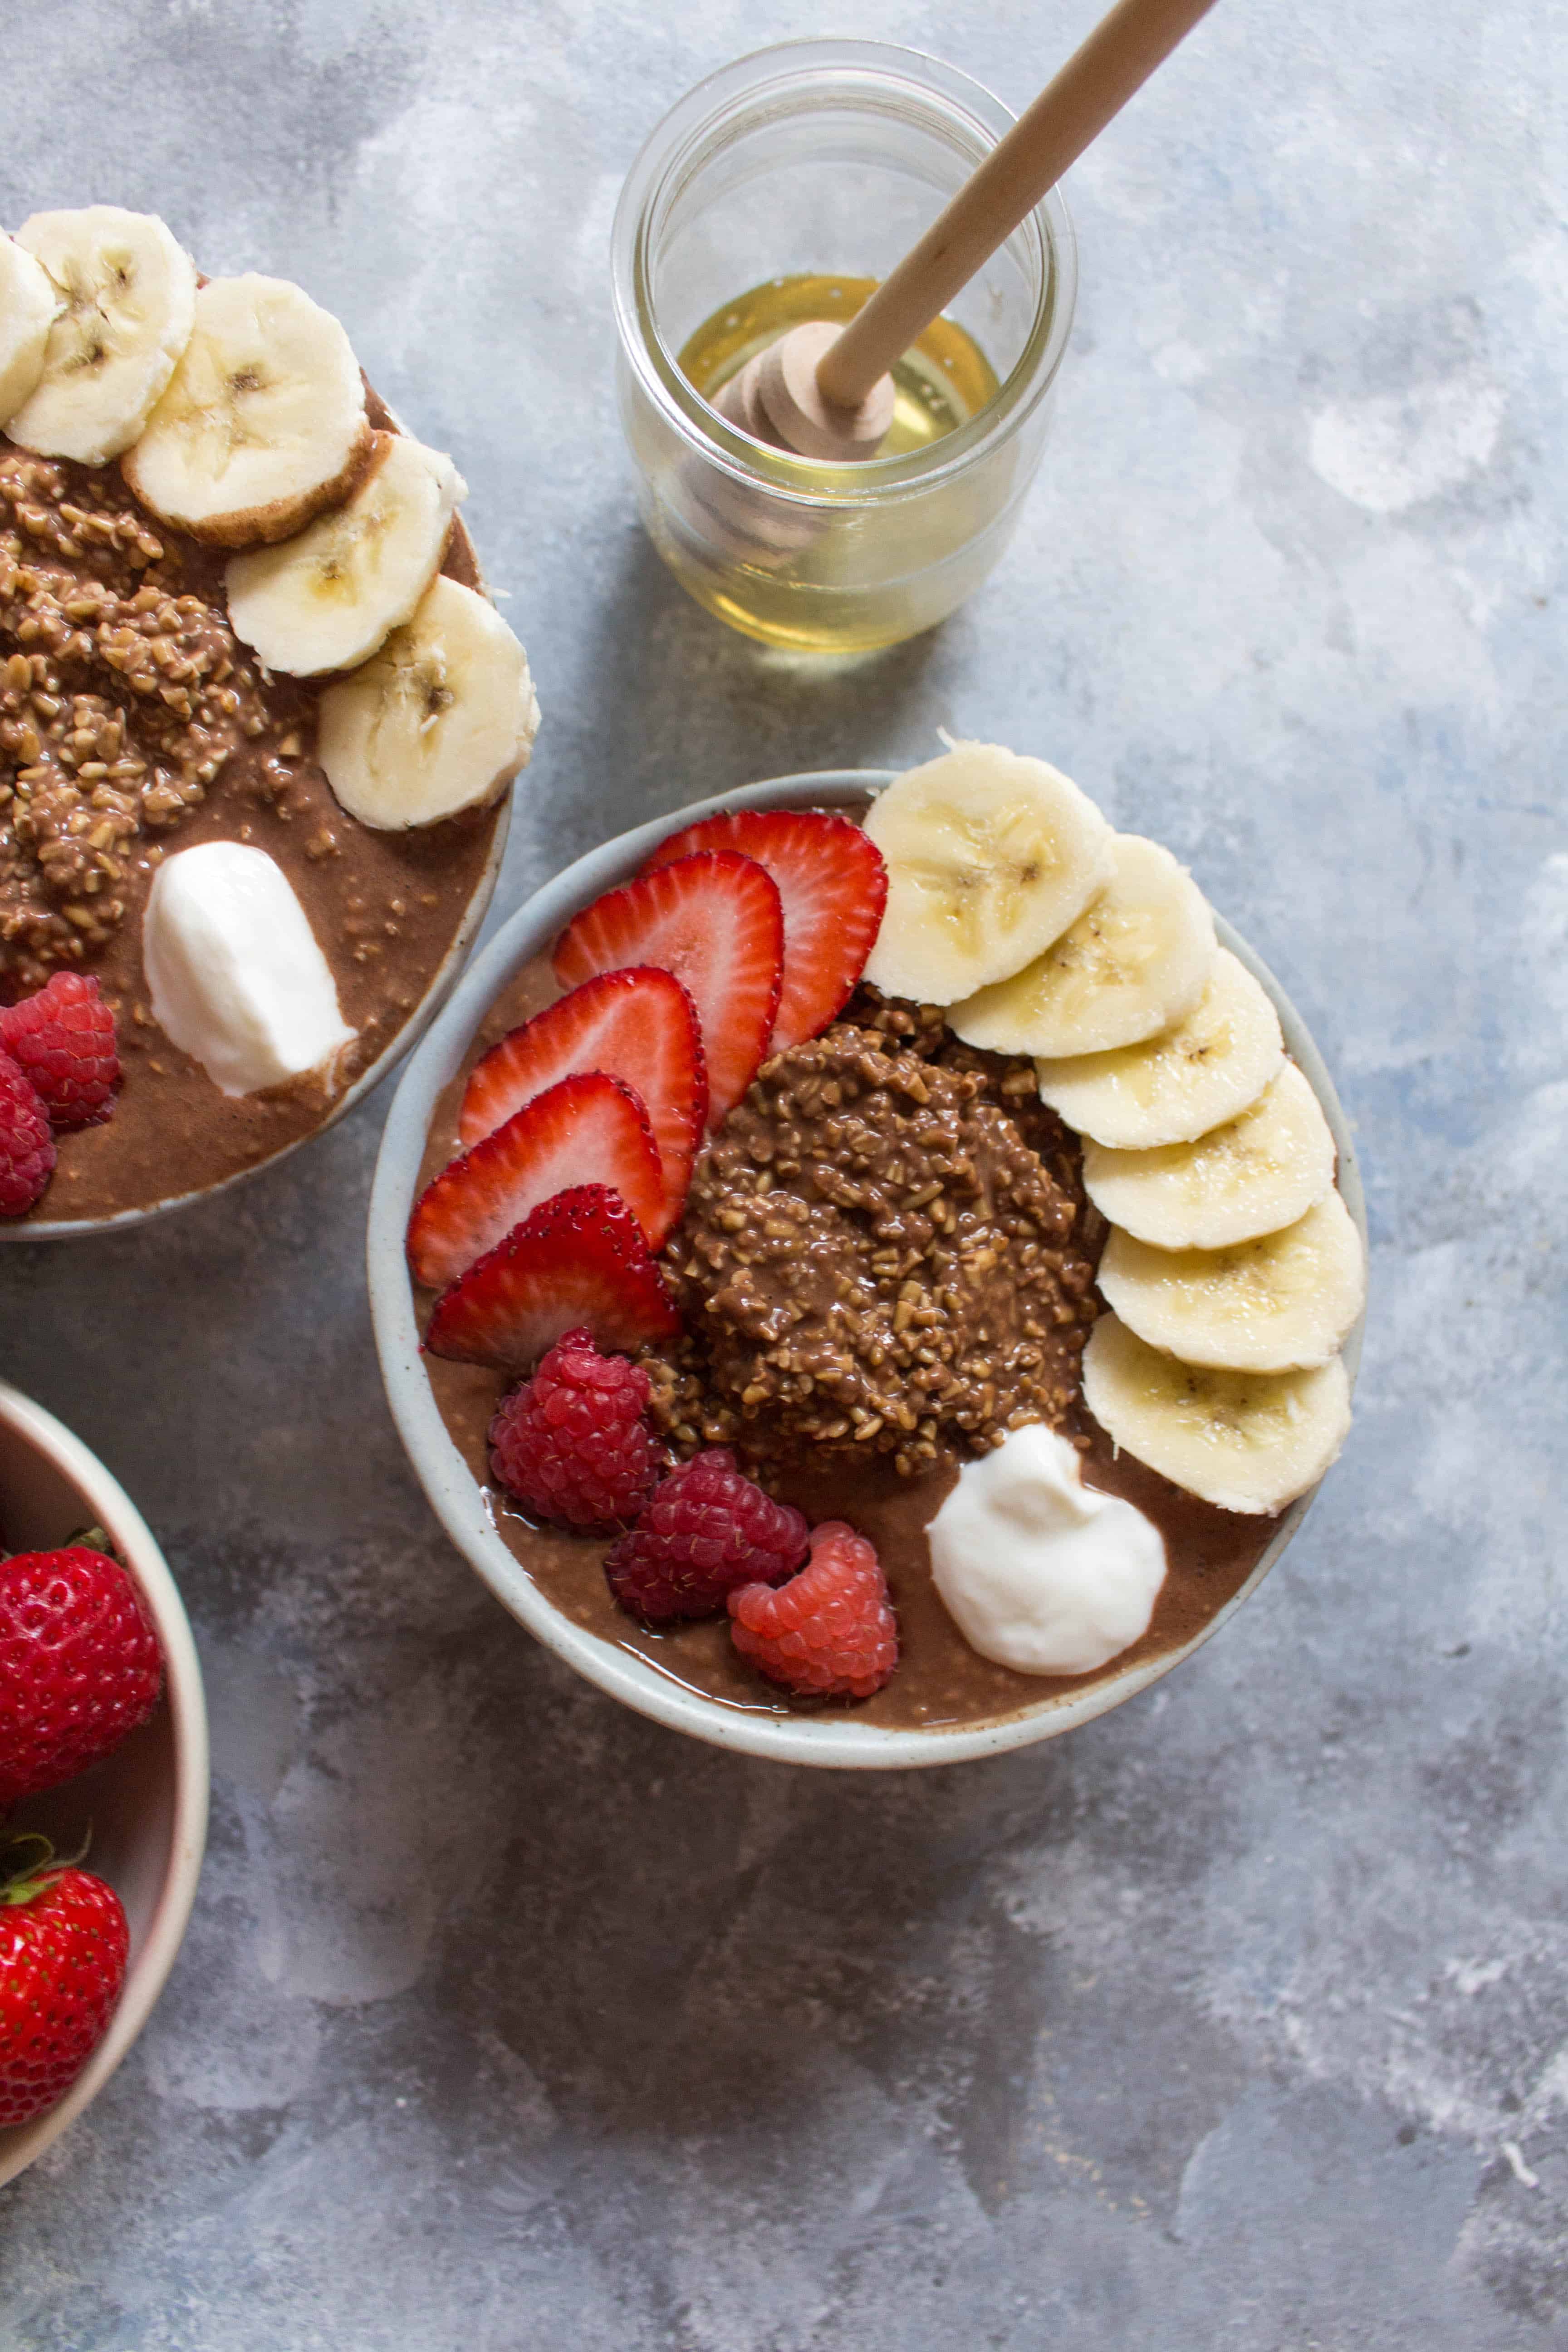 Are you ready for breakfast with a twist? Prepared in under 10 minutes the night before, this Chocolate Chia Steel Cut Overnight Oats is so delicious and creamy, that it's like eating ice cream for breakfast!